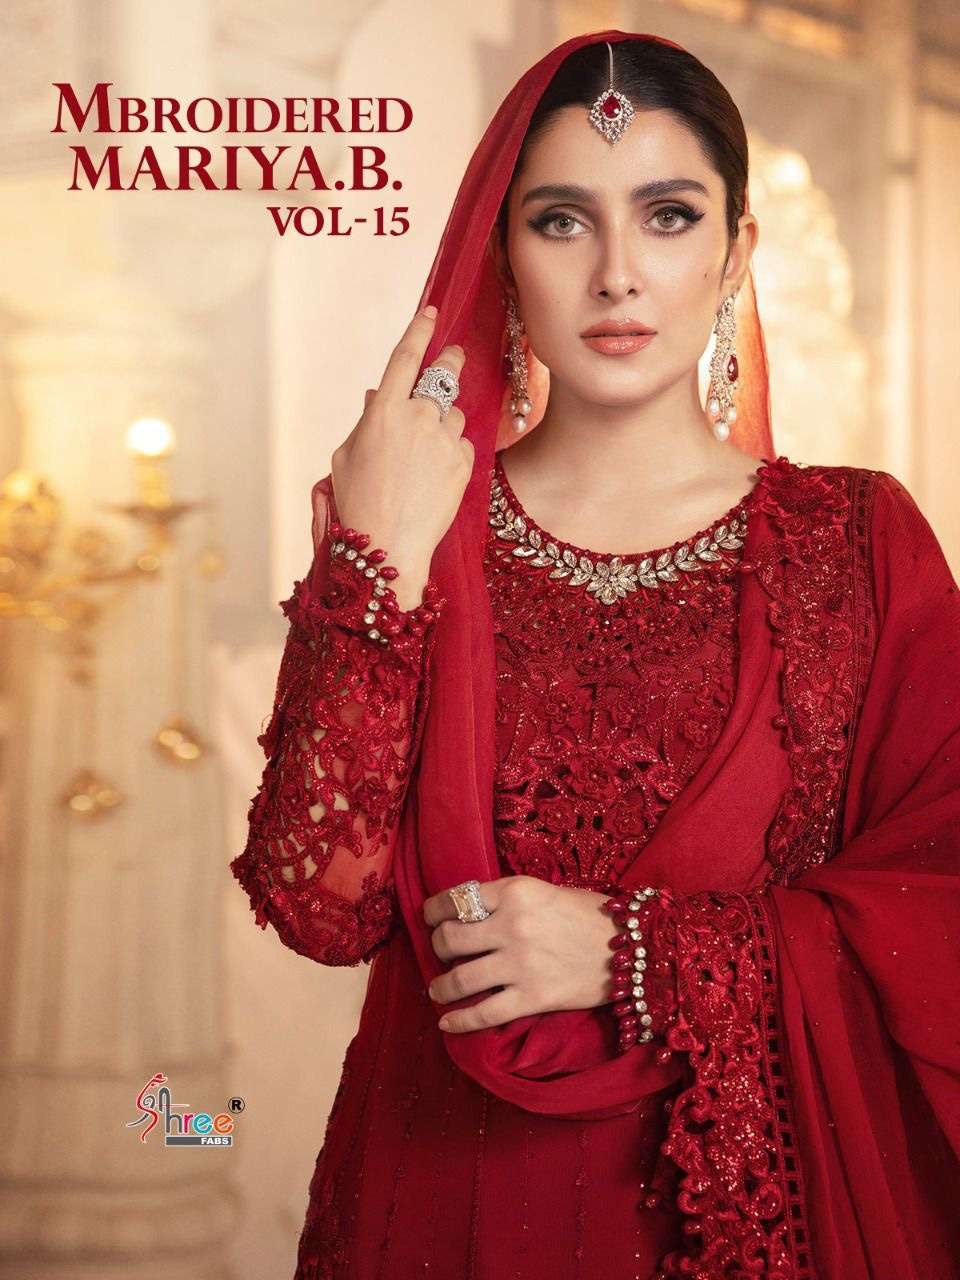 Shree fabs maria b mbroidered vol 15 organza faux georgette with heavy embroidery work pakistani dress material at wholesale Rate 